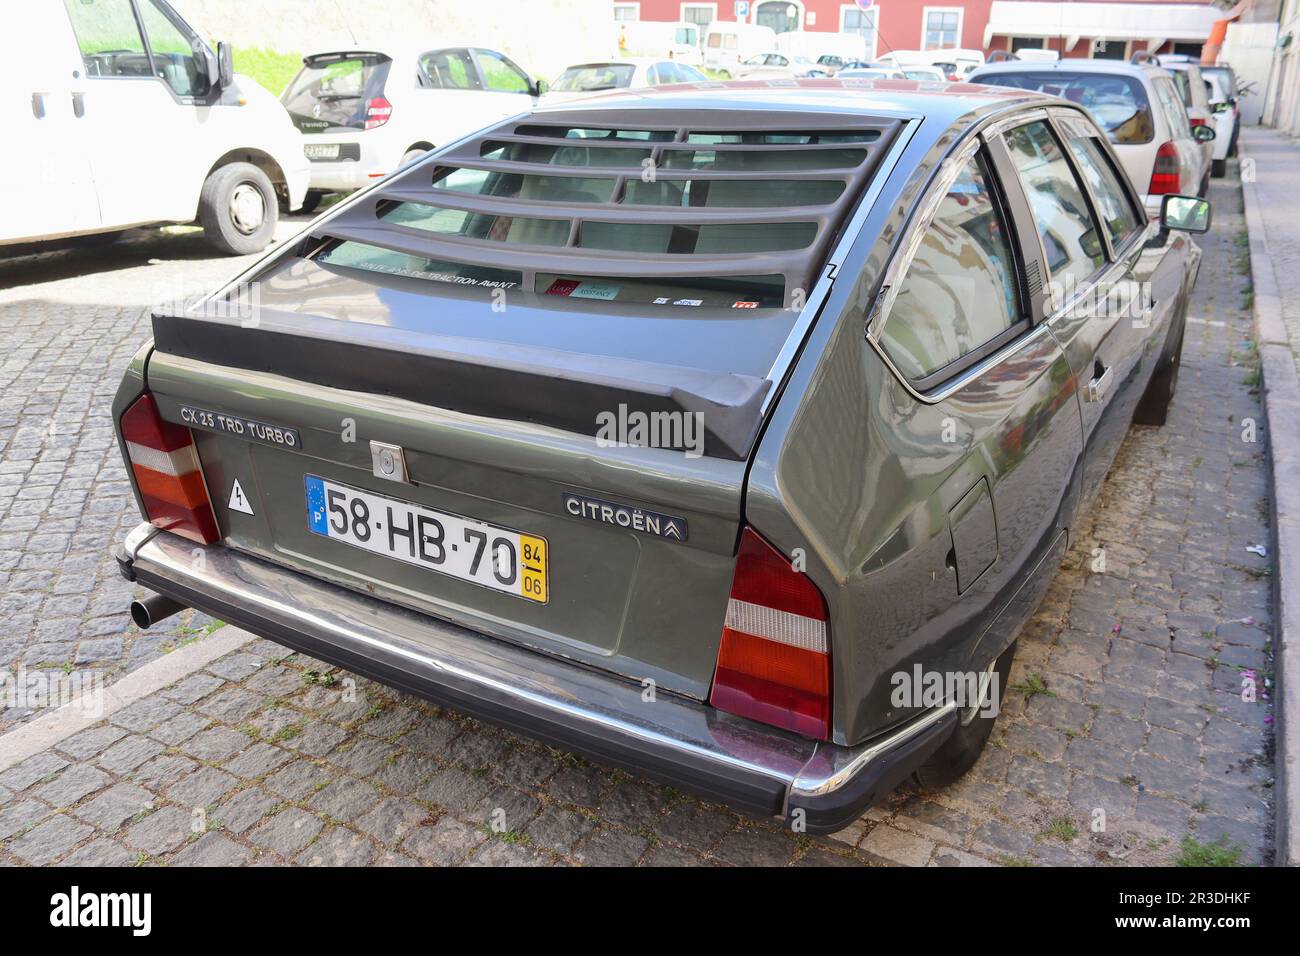 Citroen CX 25 TRD Turbo with its Kamm tail and stainless steel bumpers. A concave rear window is kept clear from rain without requiring a rear wiper. Stock Photo